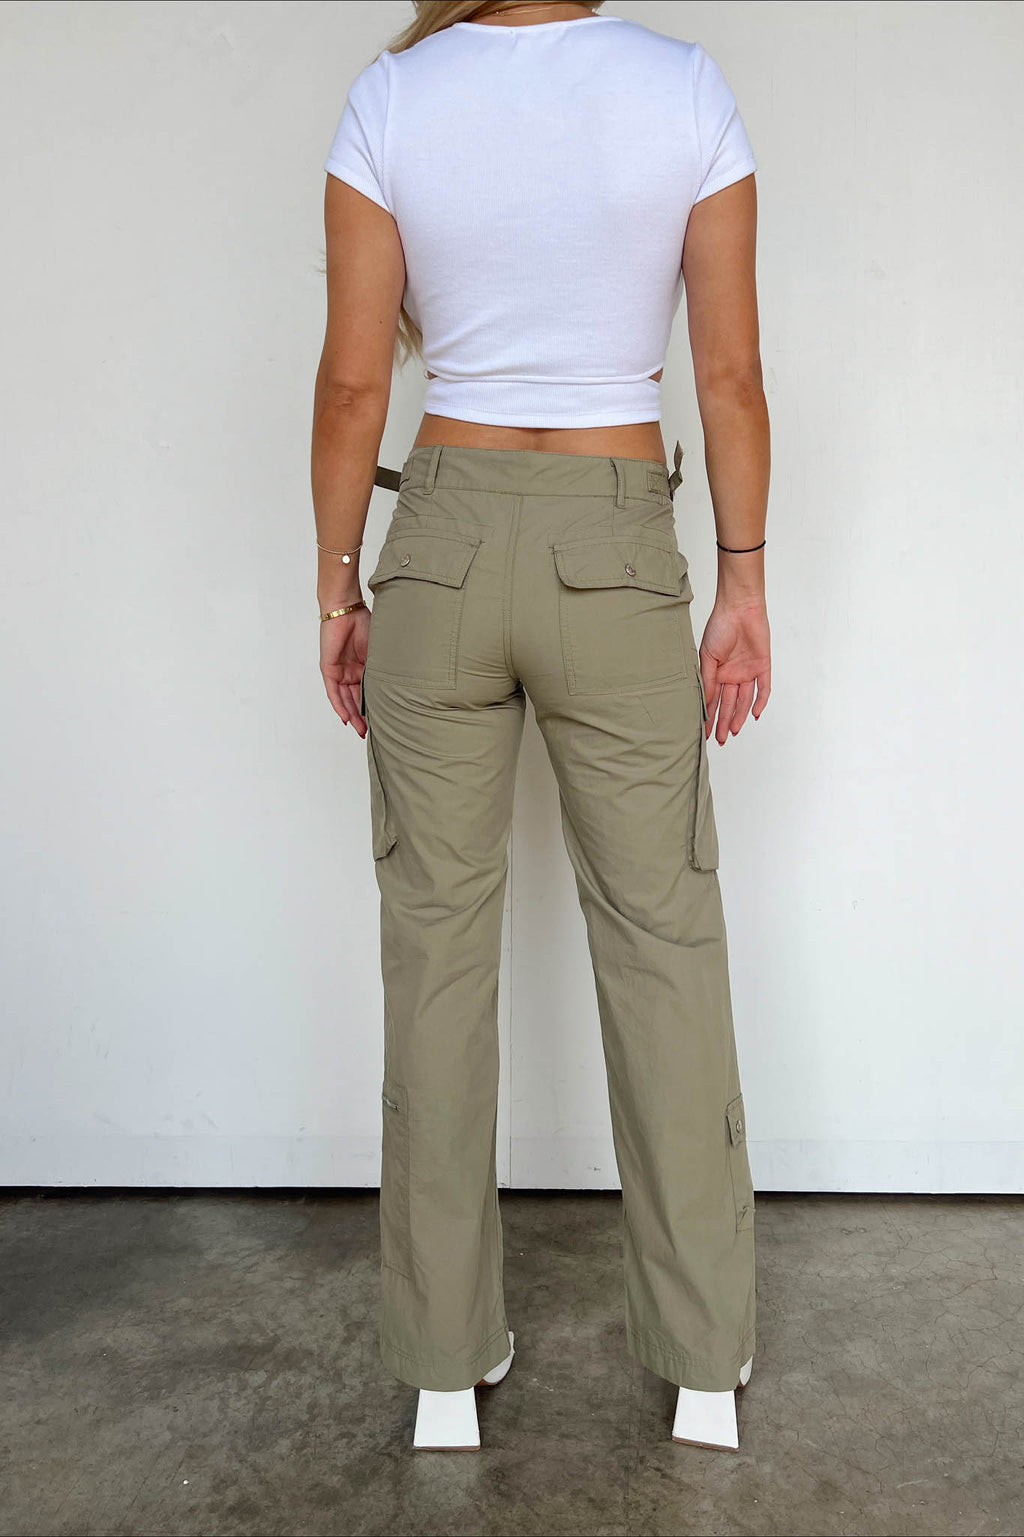 90s Chick Cargo Pants